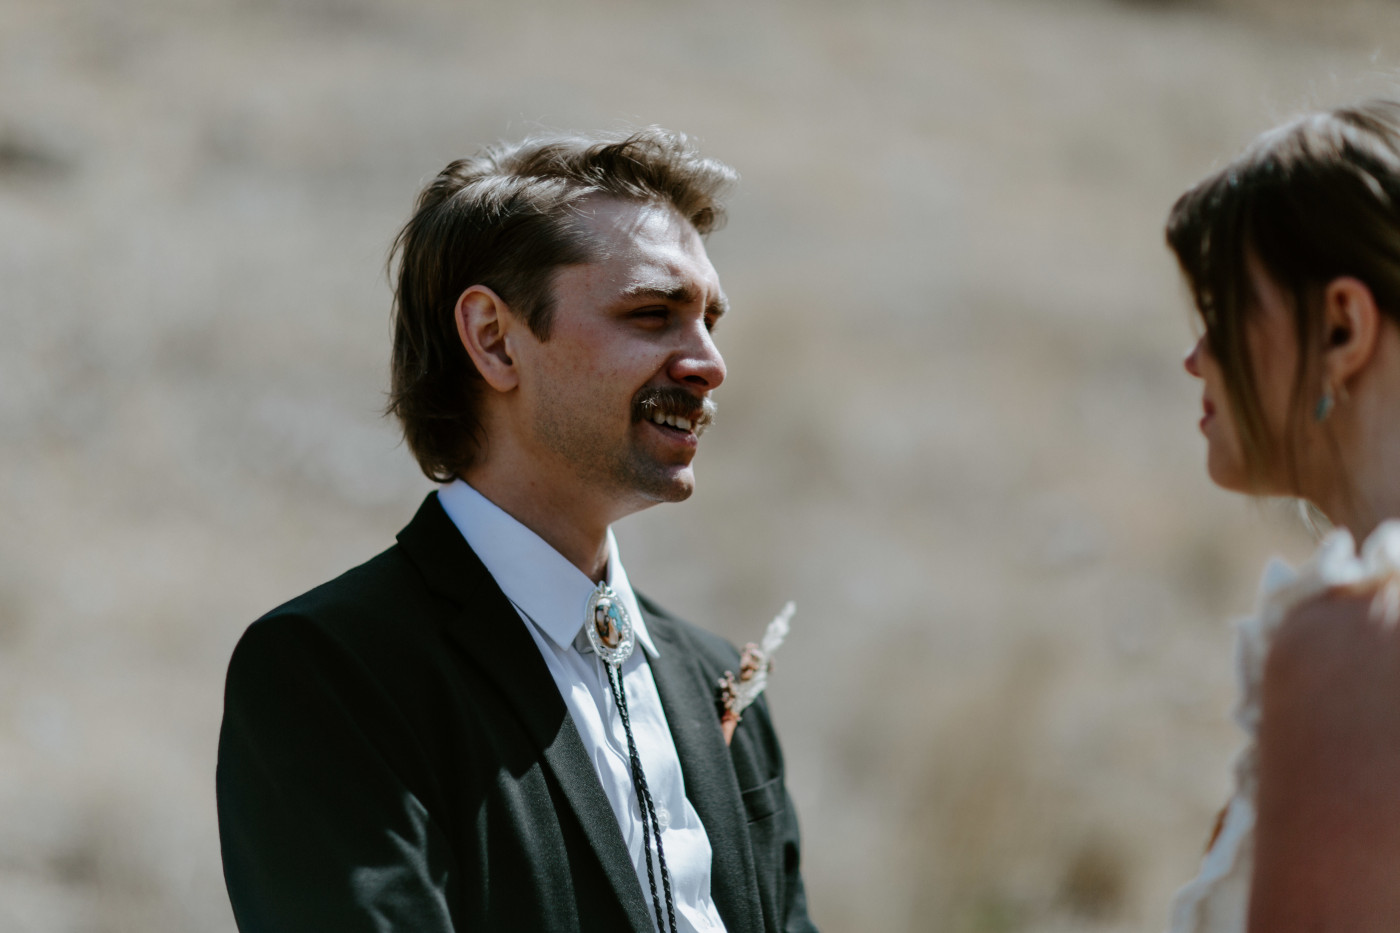 Greyson recites his vows. Elopement photography in the Central Oregon desert by Sienna Plus Josh.